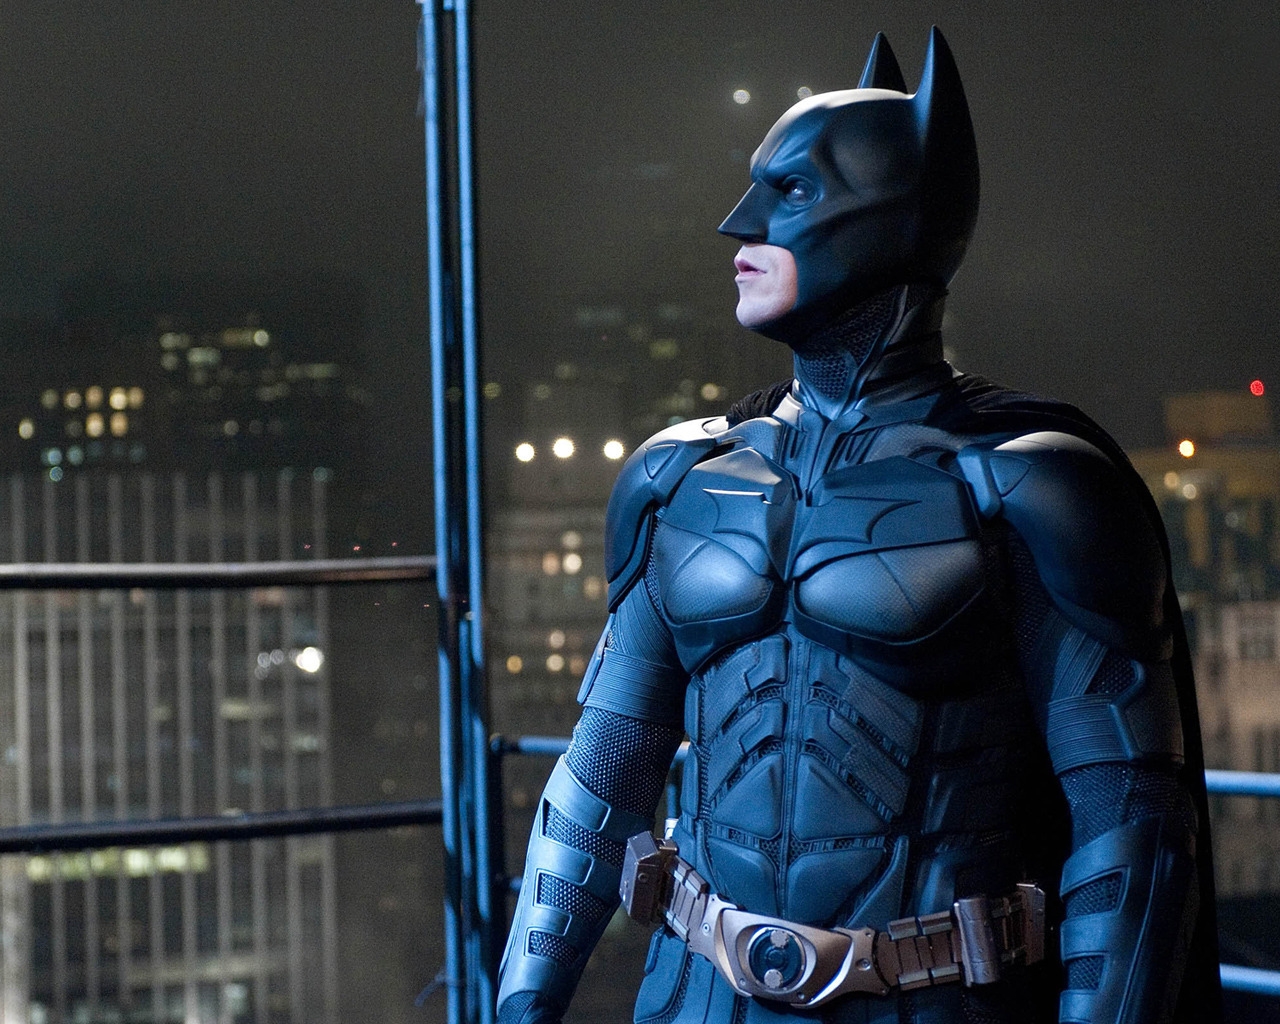 The Dark Knight Rises for 1280 x 1024 resolution